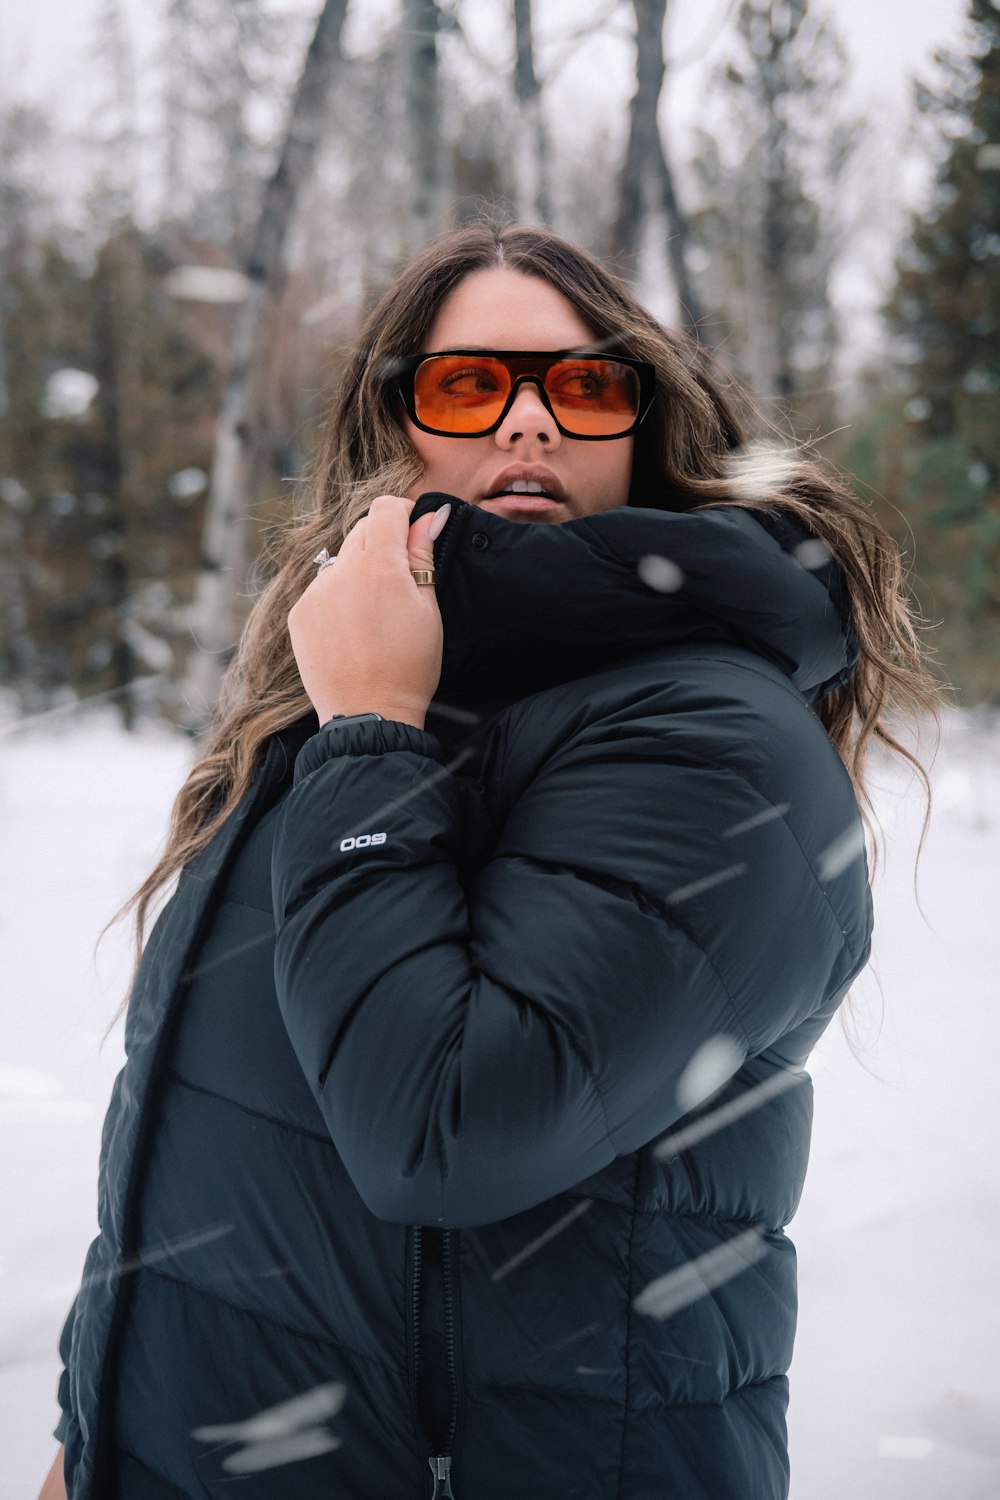 a woman wearing sunglasses standing in the snow